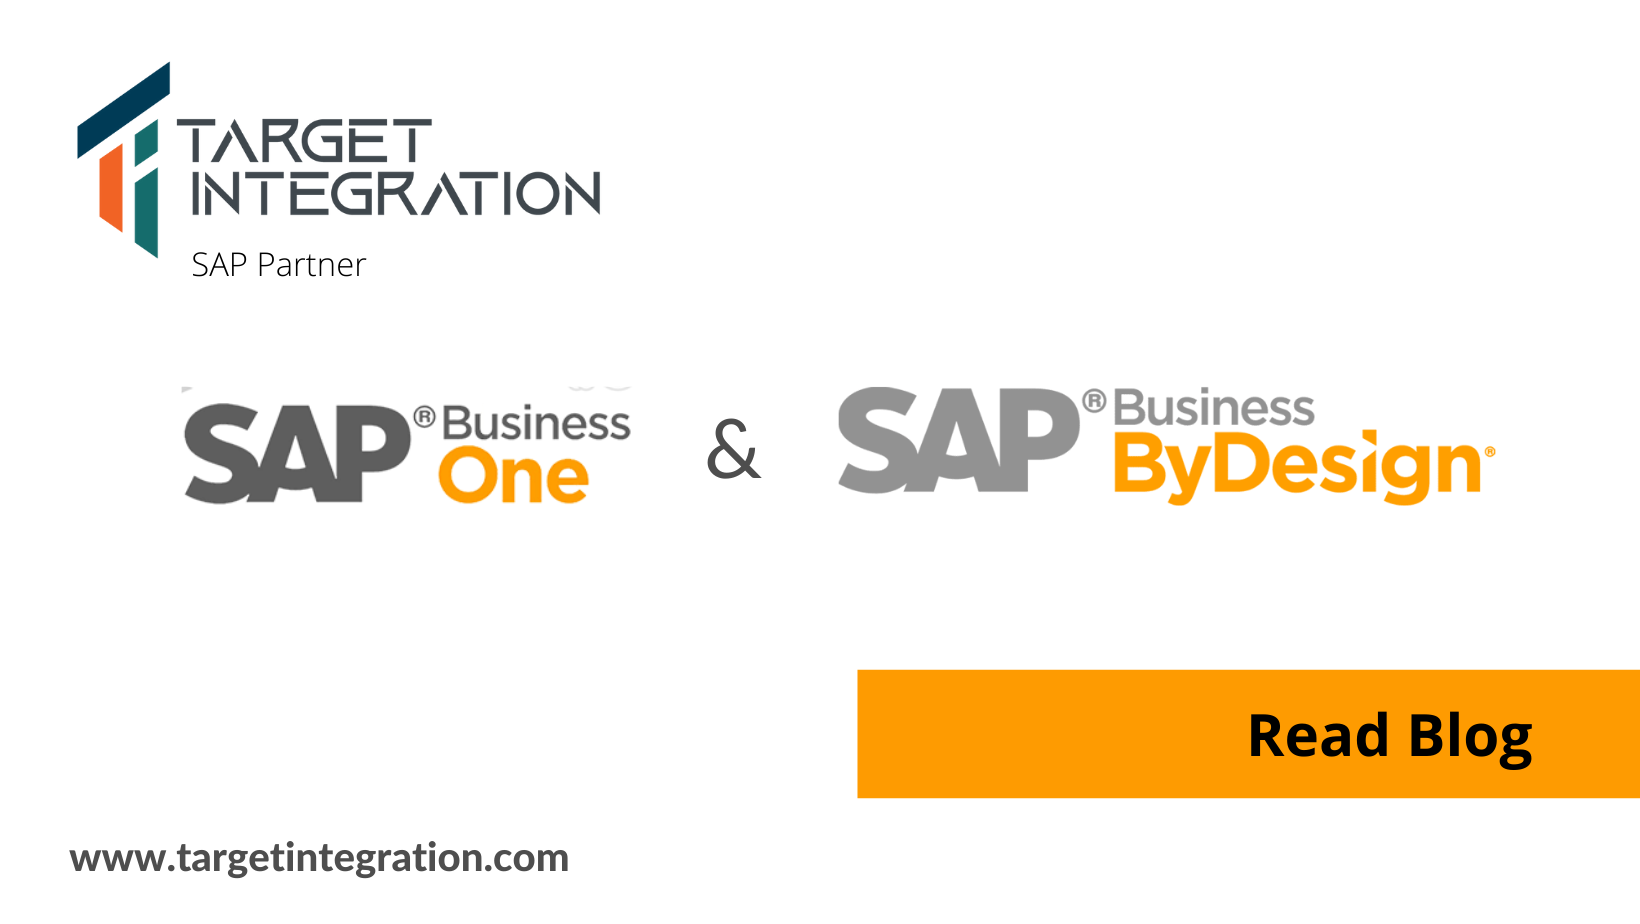 Comparison of SAP Business One and SAP Business ByDesign